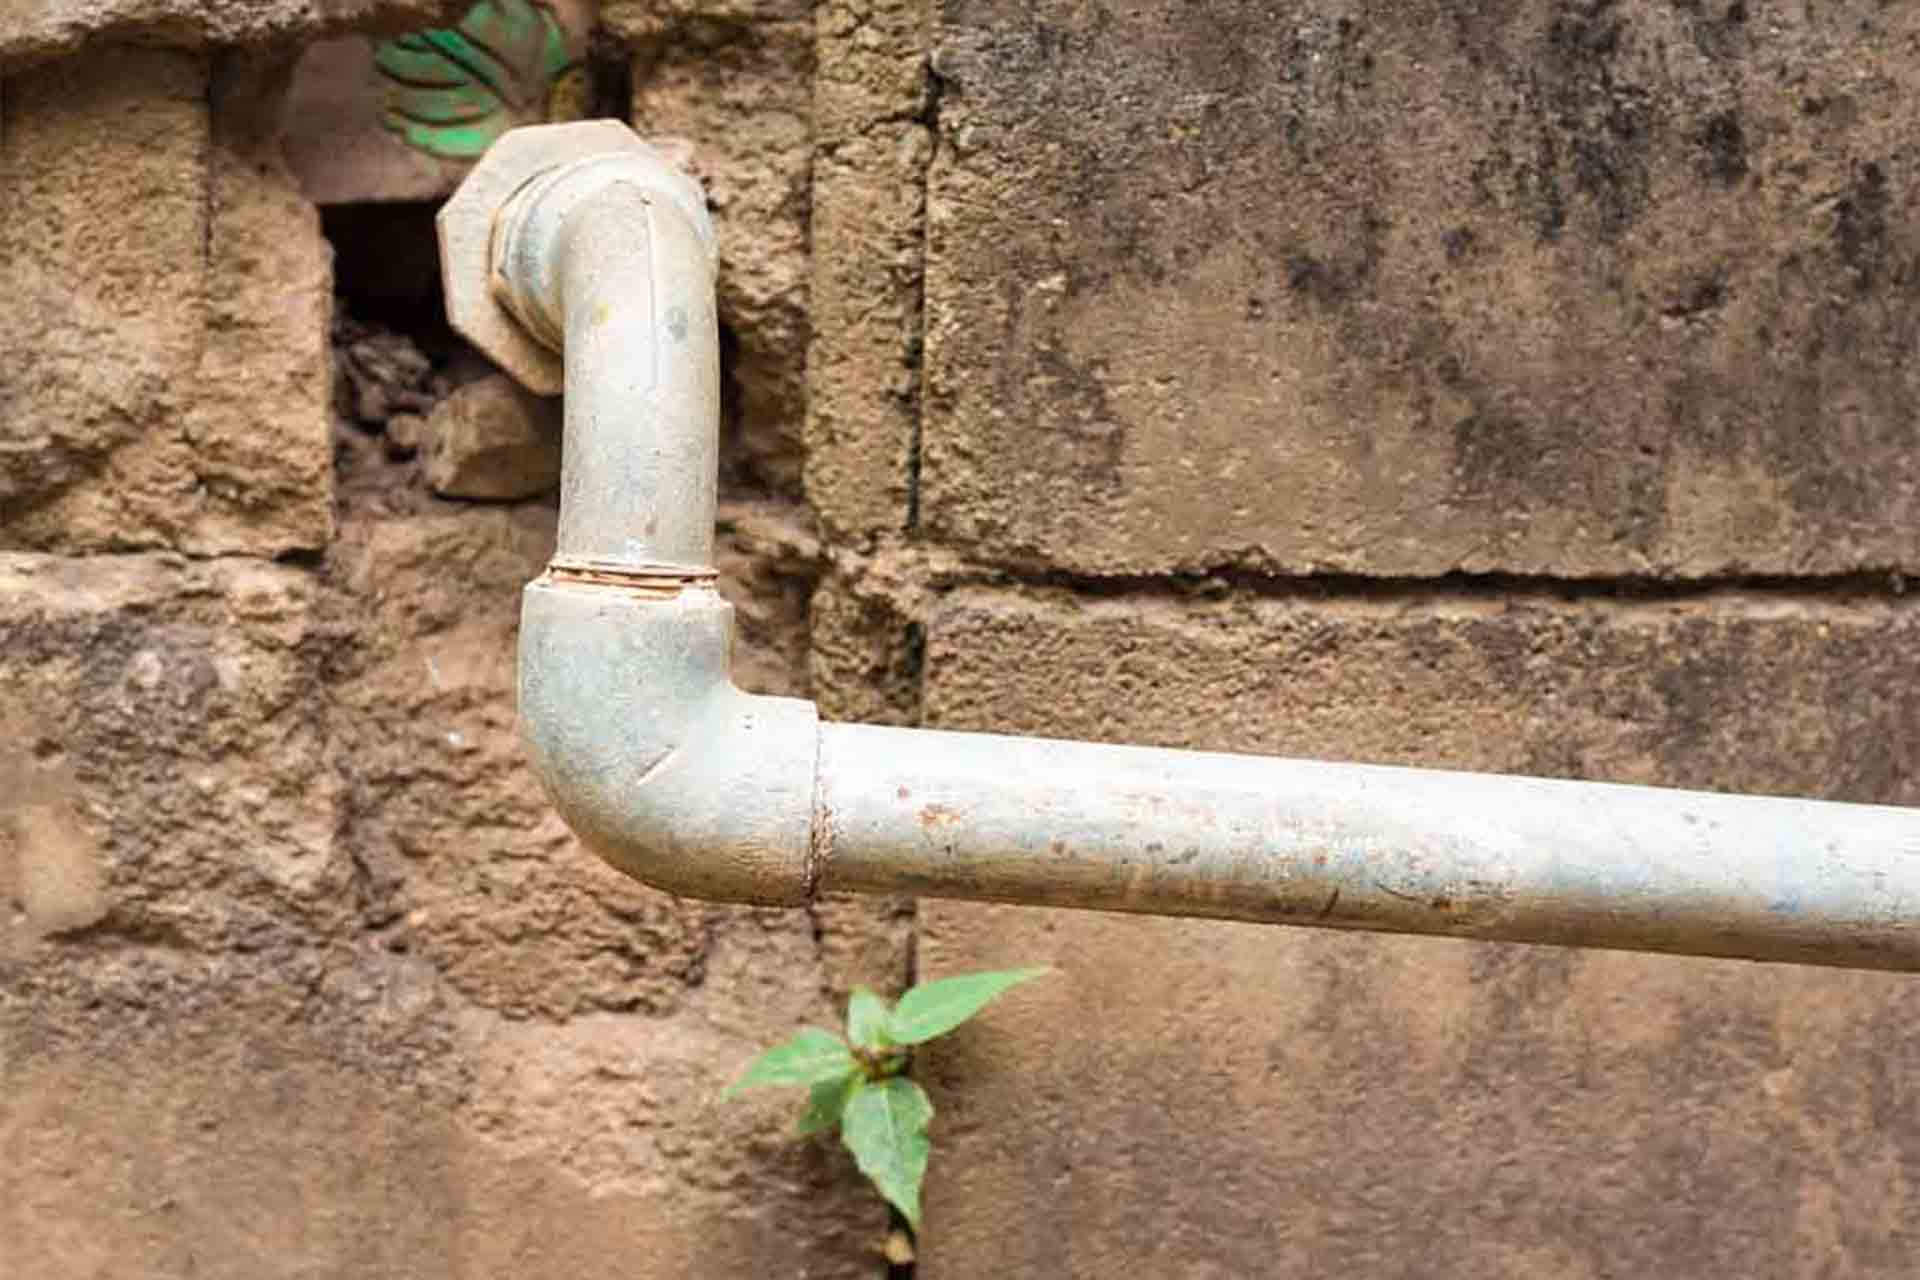 How to Stop a Pipe Leak While You Wait for a Plumber